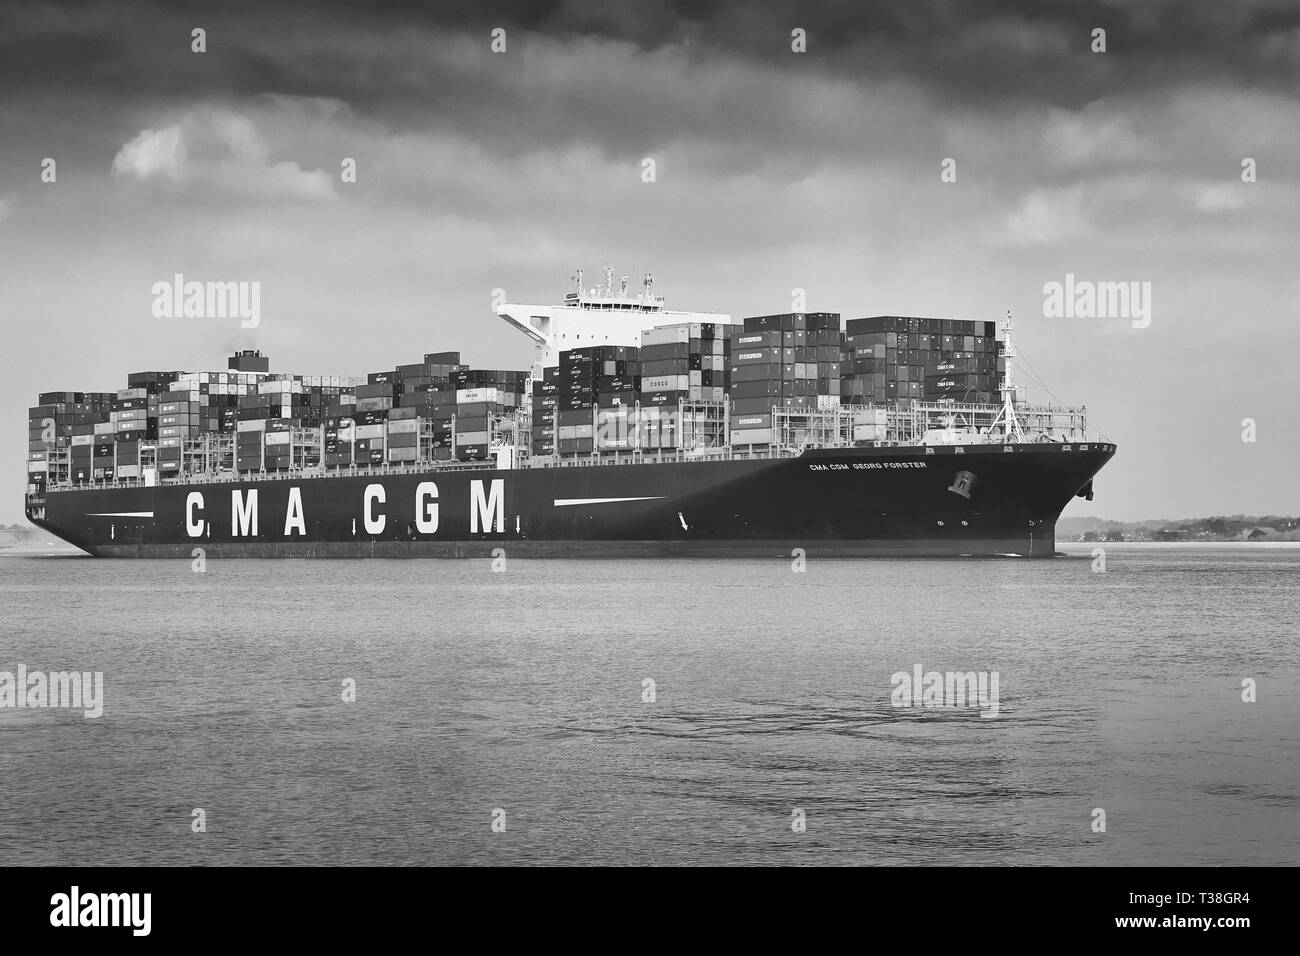 Moody Black And White Photo Of The Giant Container Ship CMA CGM GEORG FORSTER, Leaving The Port Of Southampton. Stock Photo